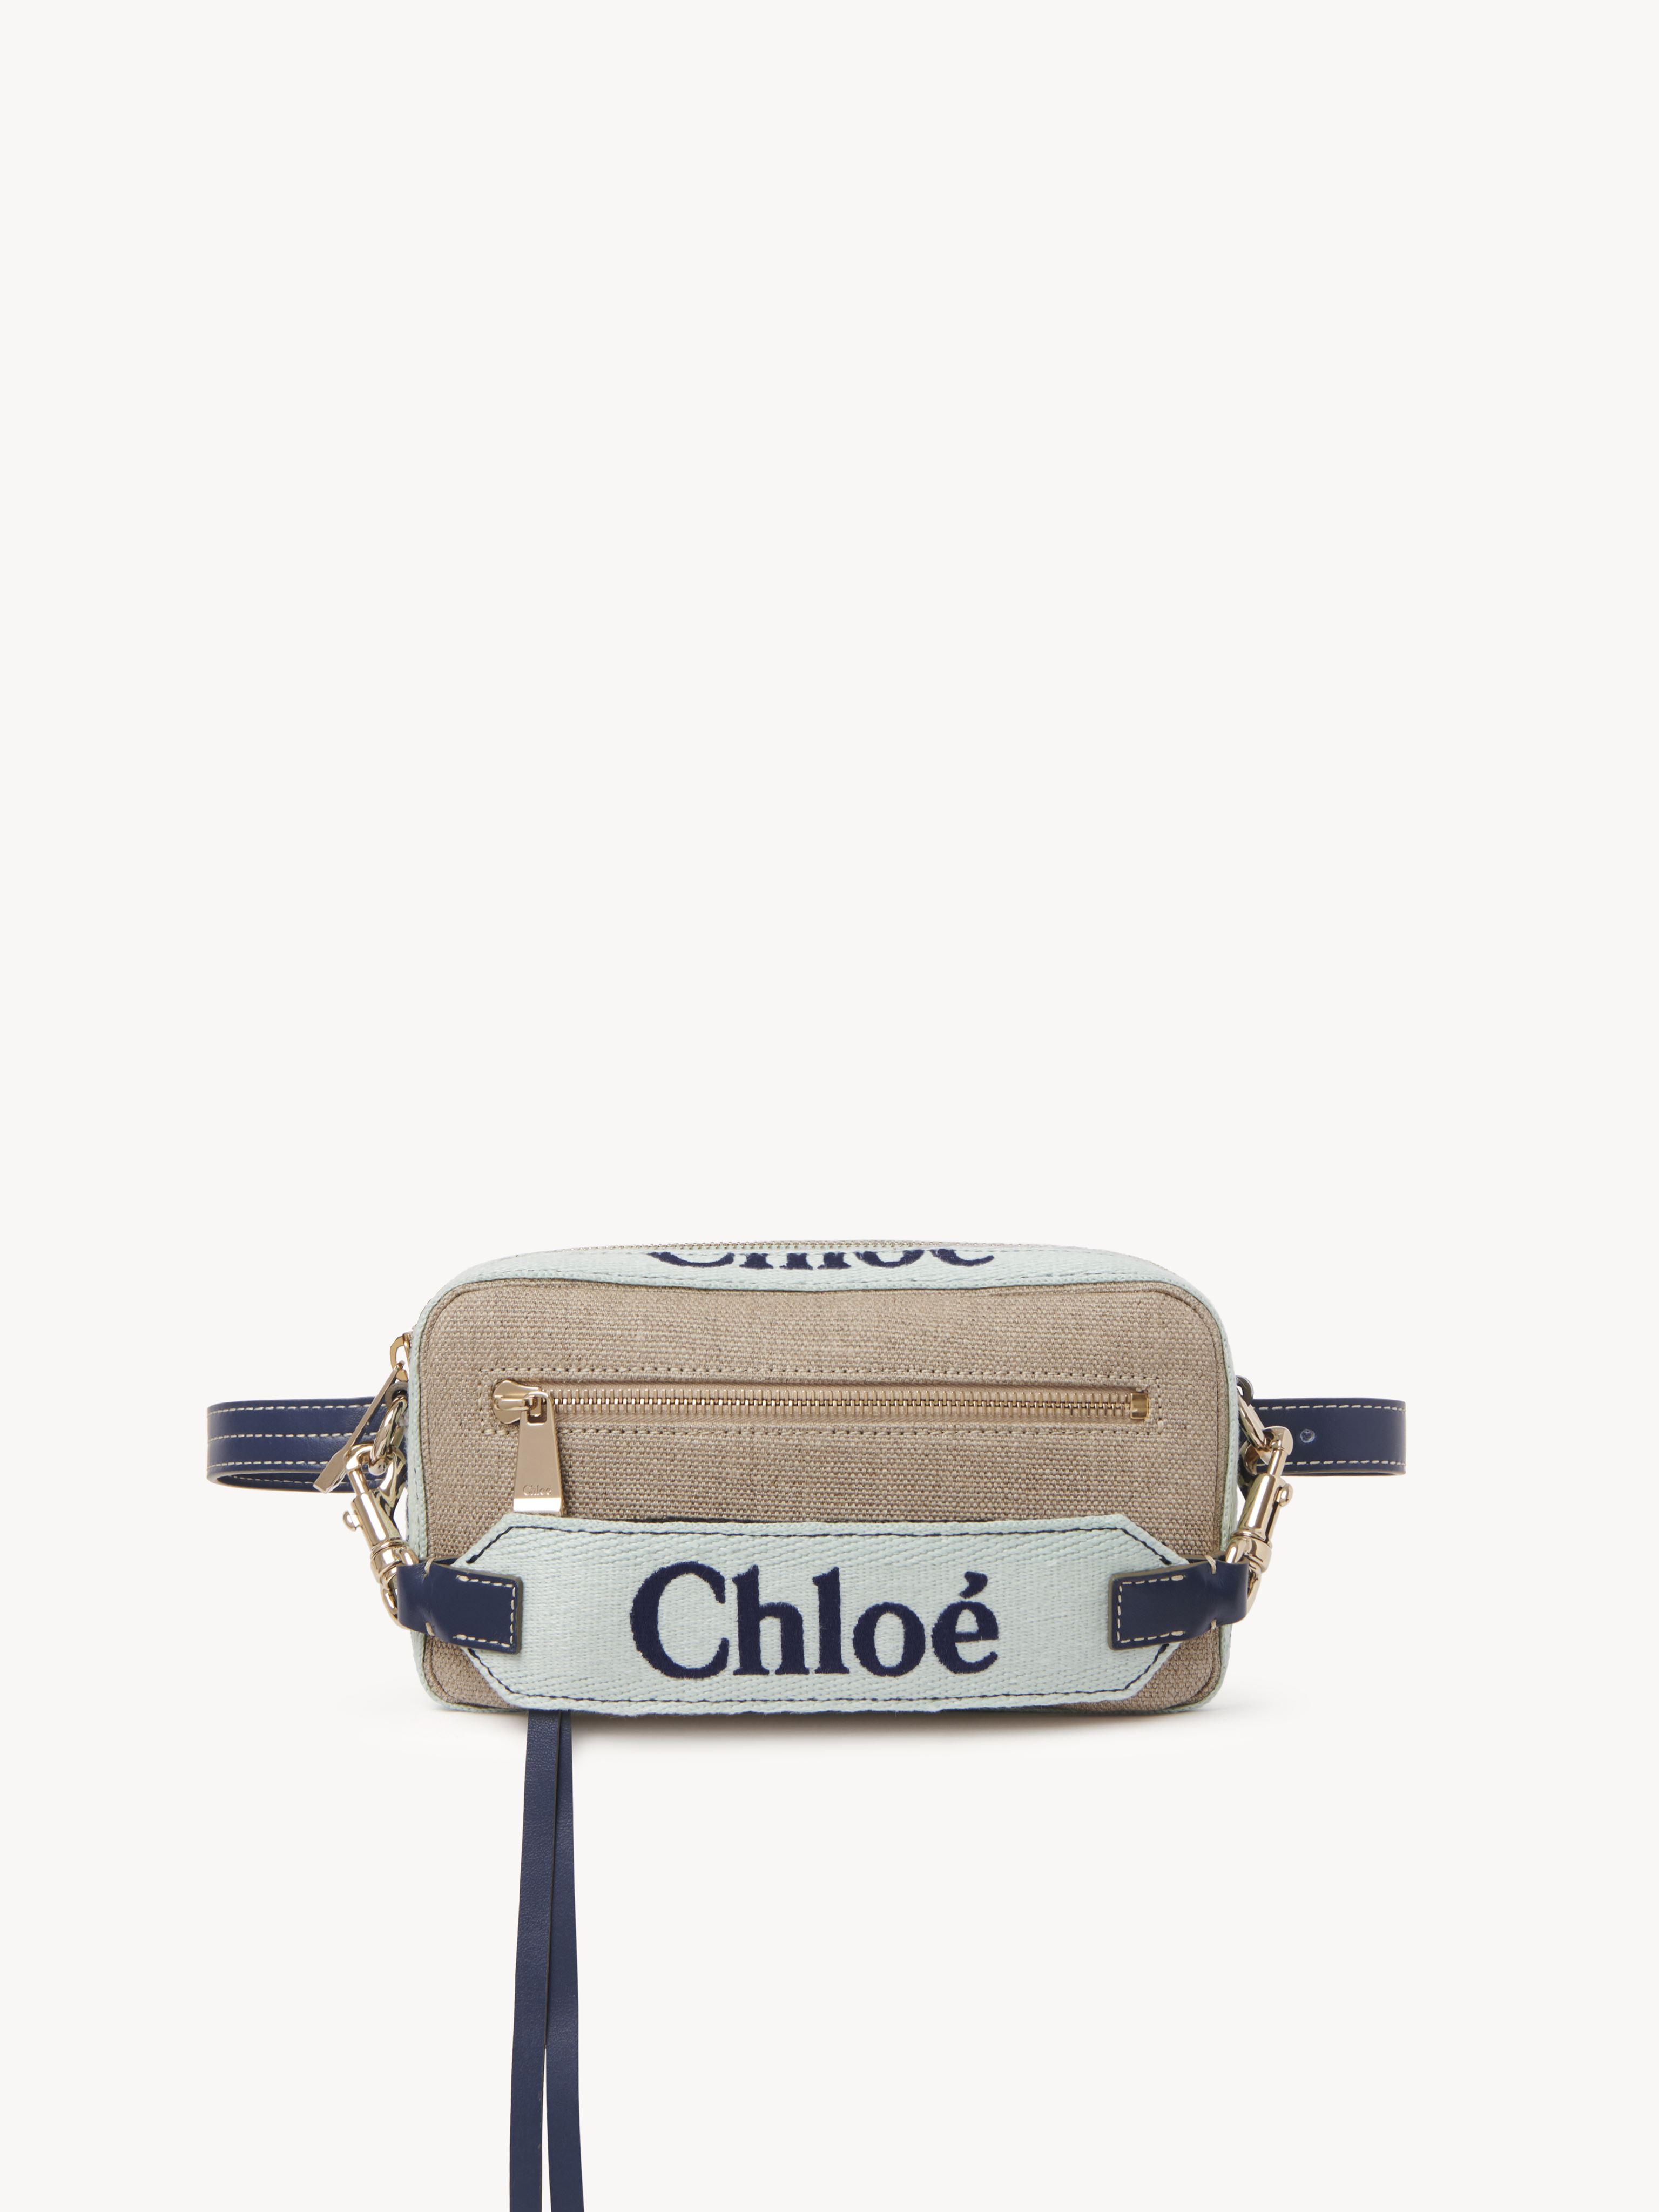 Chloé Woody Belt Bag Multicolor Size Onesize 100% Linen, Calf-skin Leather In Neutral